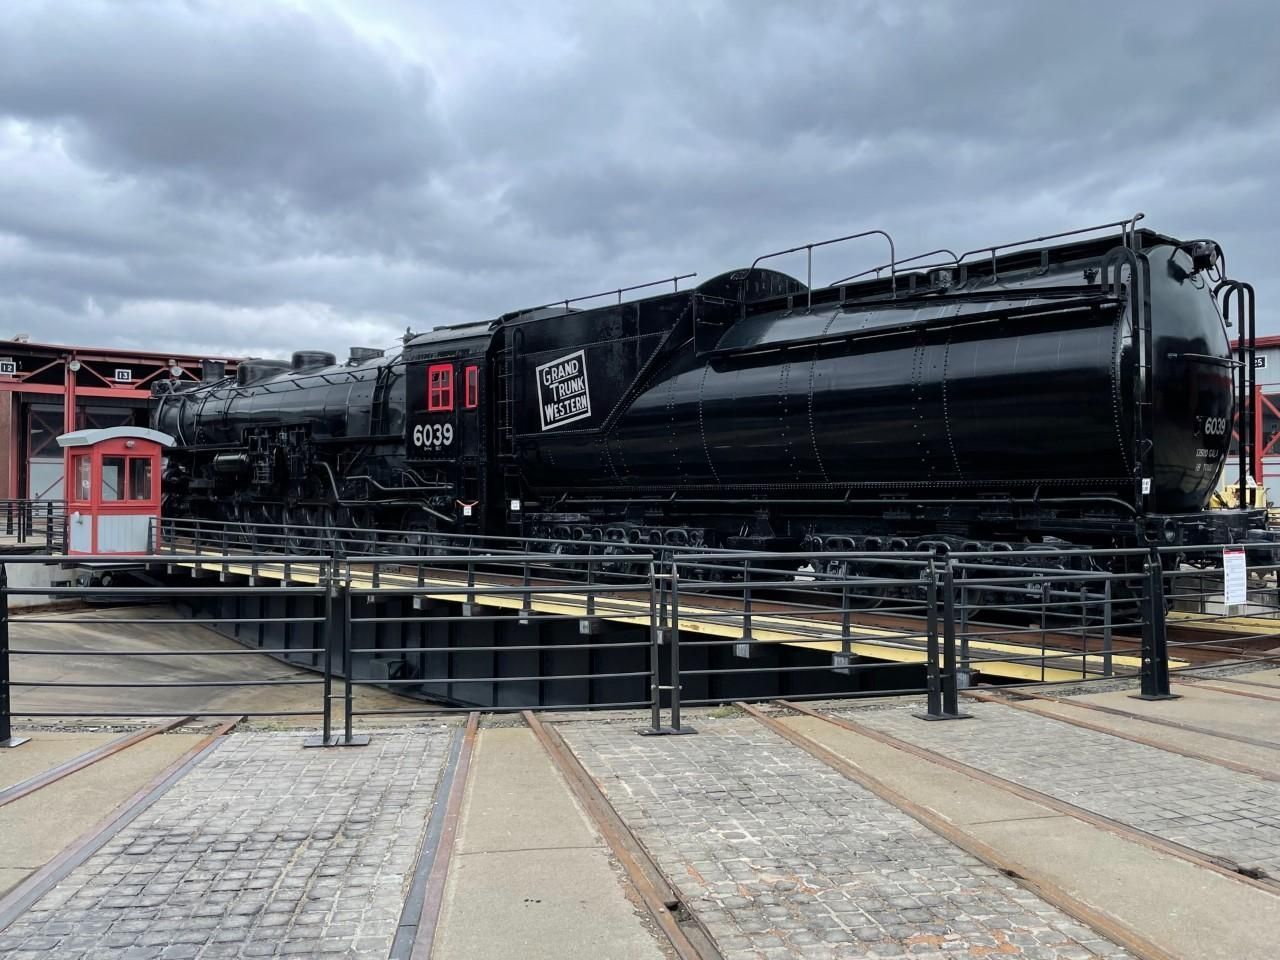 No. 6039 sits on the turntable within Steamtown's Roundhouse complex